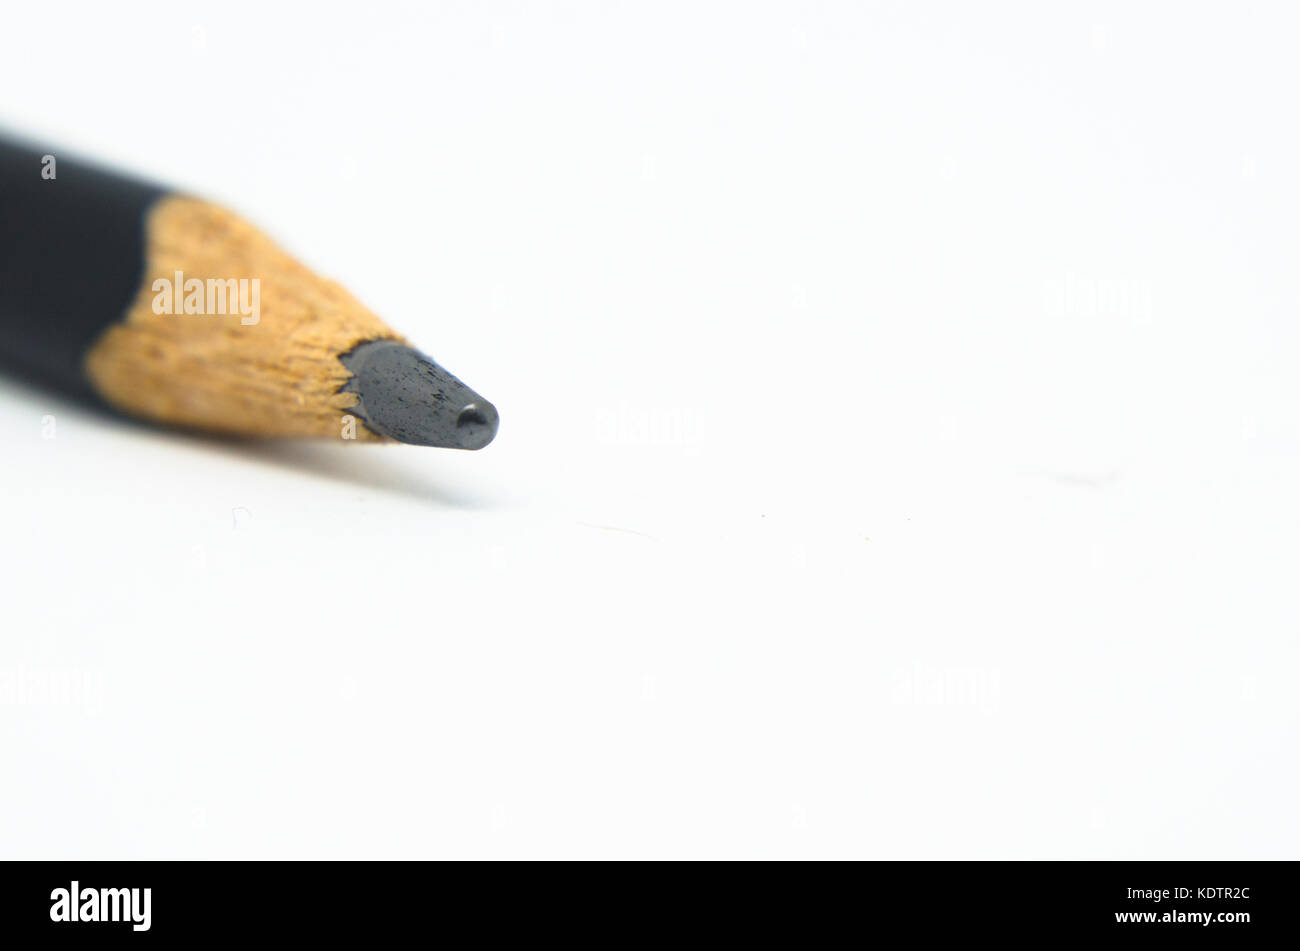 close up of pencil lead / tip isolated on white background Stock Photo